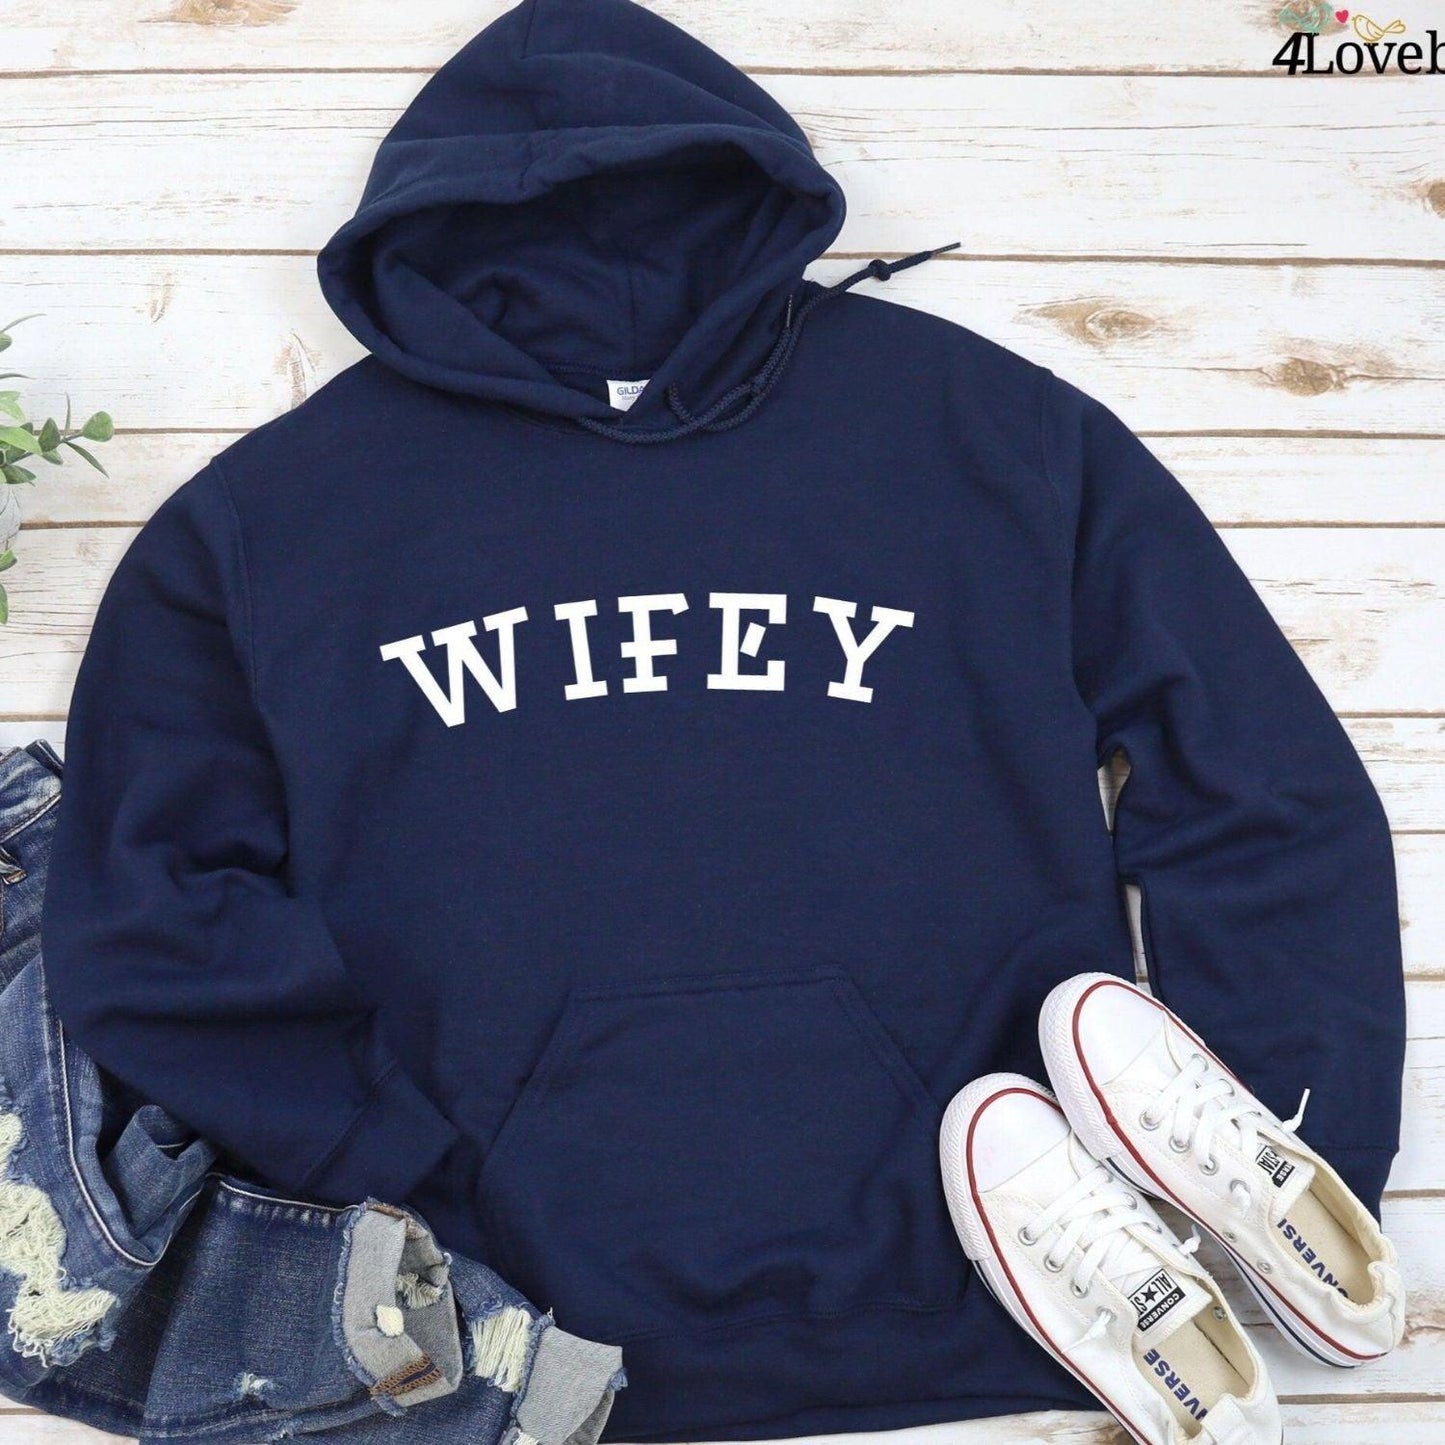 Hubby & Wifey Matching Sets: Ideal for Engagements, Weddings, Bachelorette & Honeymoon! - 4Lovebirds